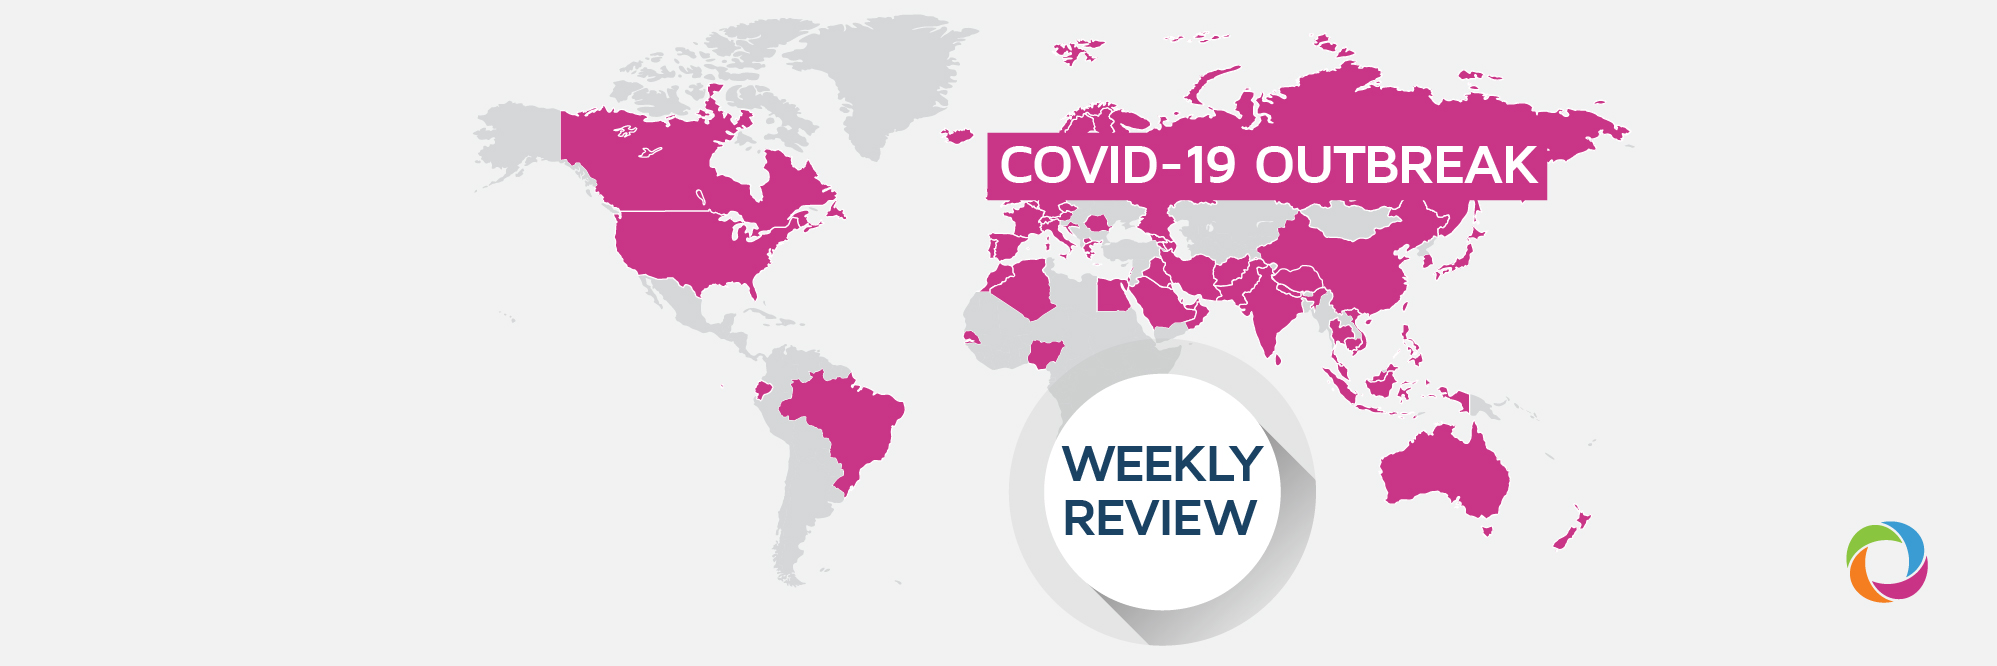 COVID-19 outbreak: Weekly review of the coronavirus situation across the world